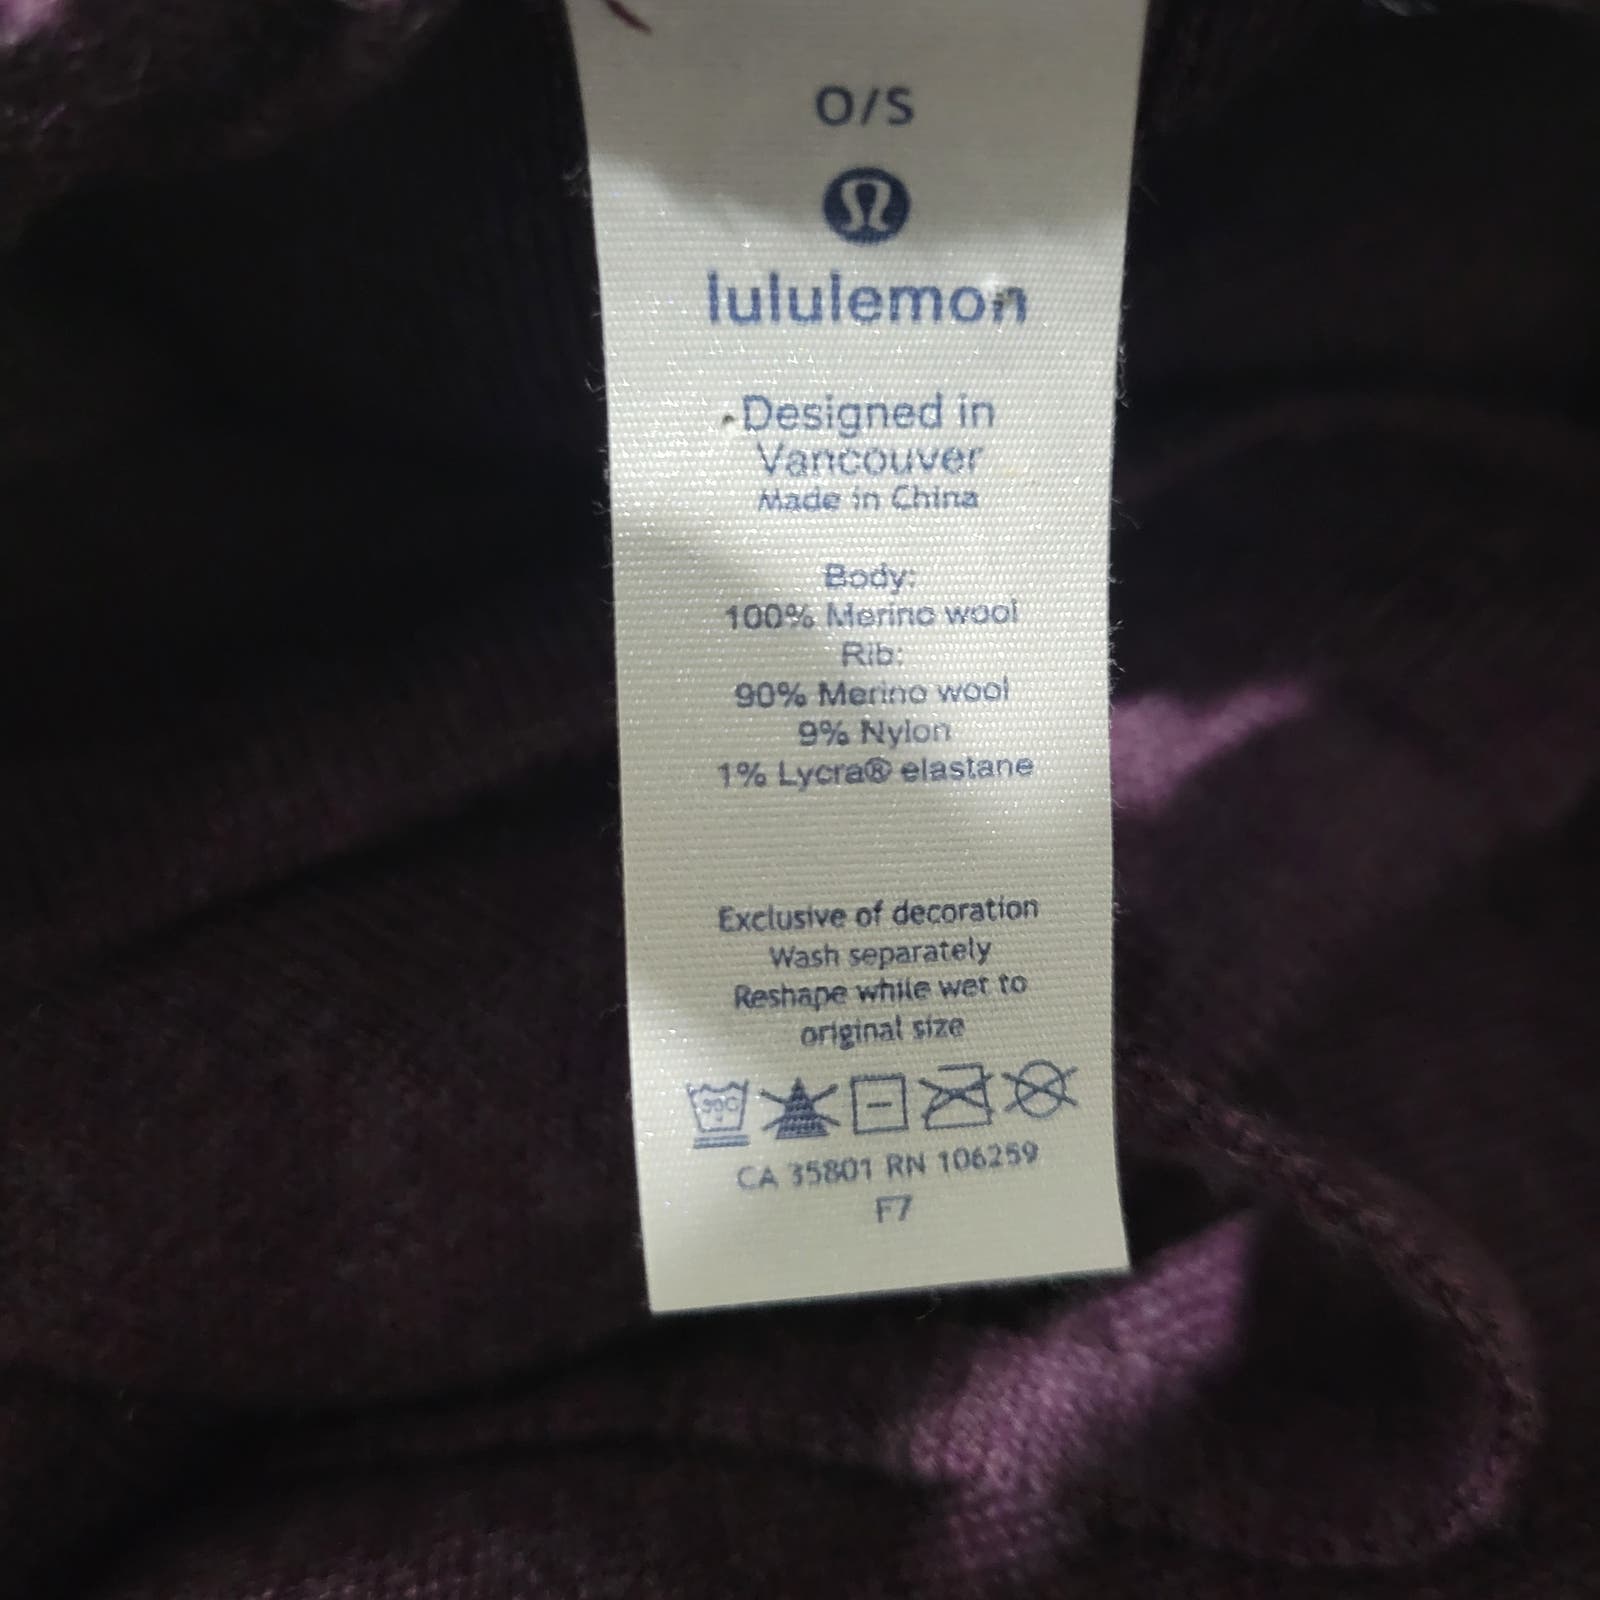 Lululemon All In A Day Poncho Purple Heathered Hooded Sweater Knit Kangaroo Pocket One Size